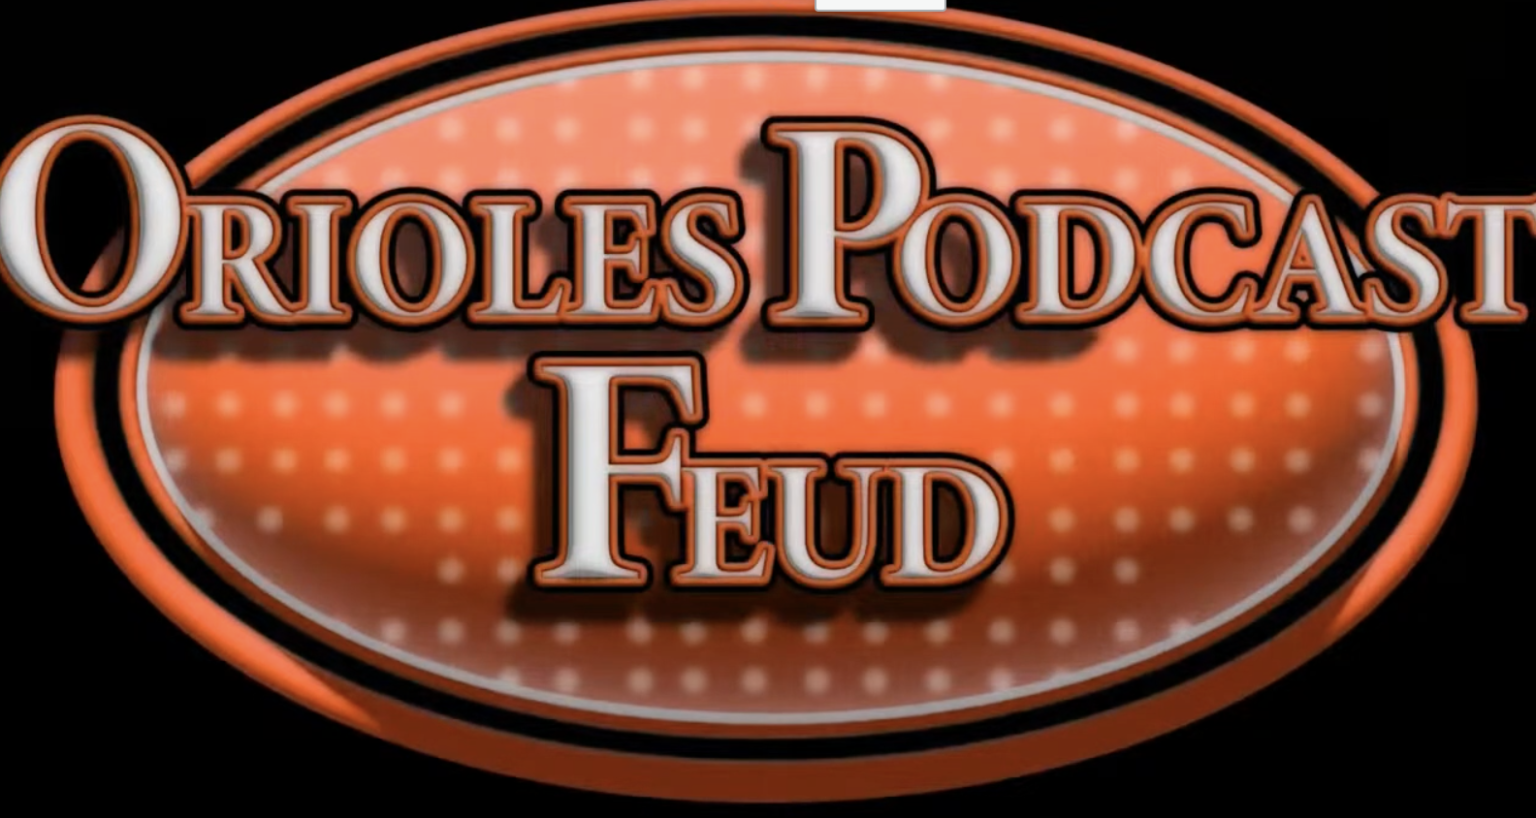 Orioles Podcast Feud